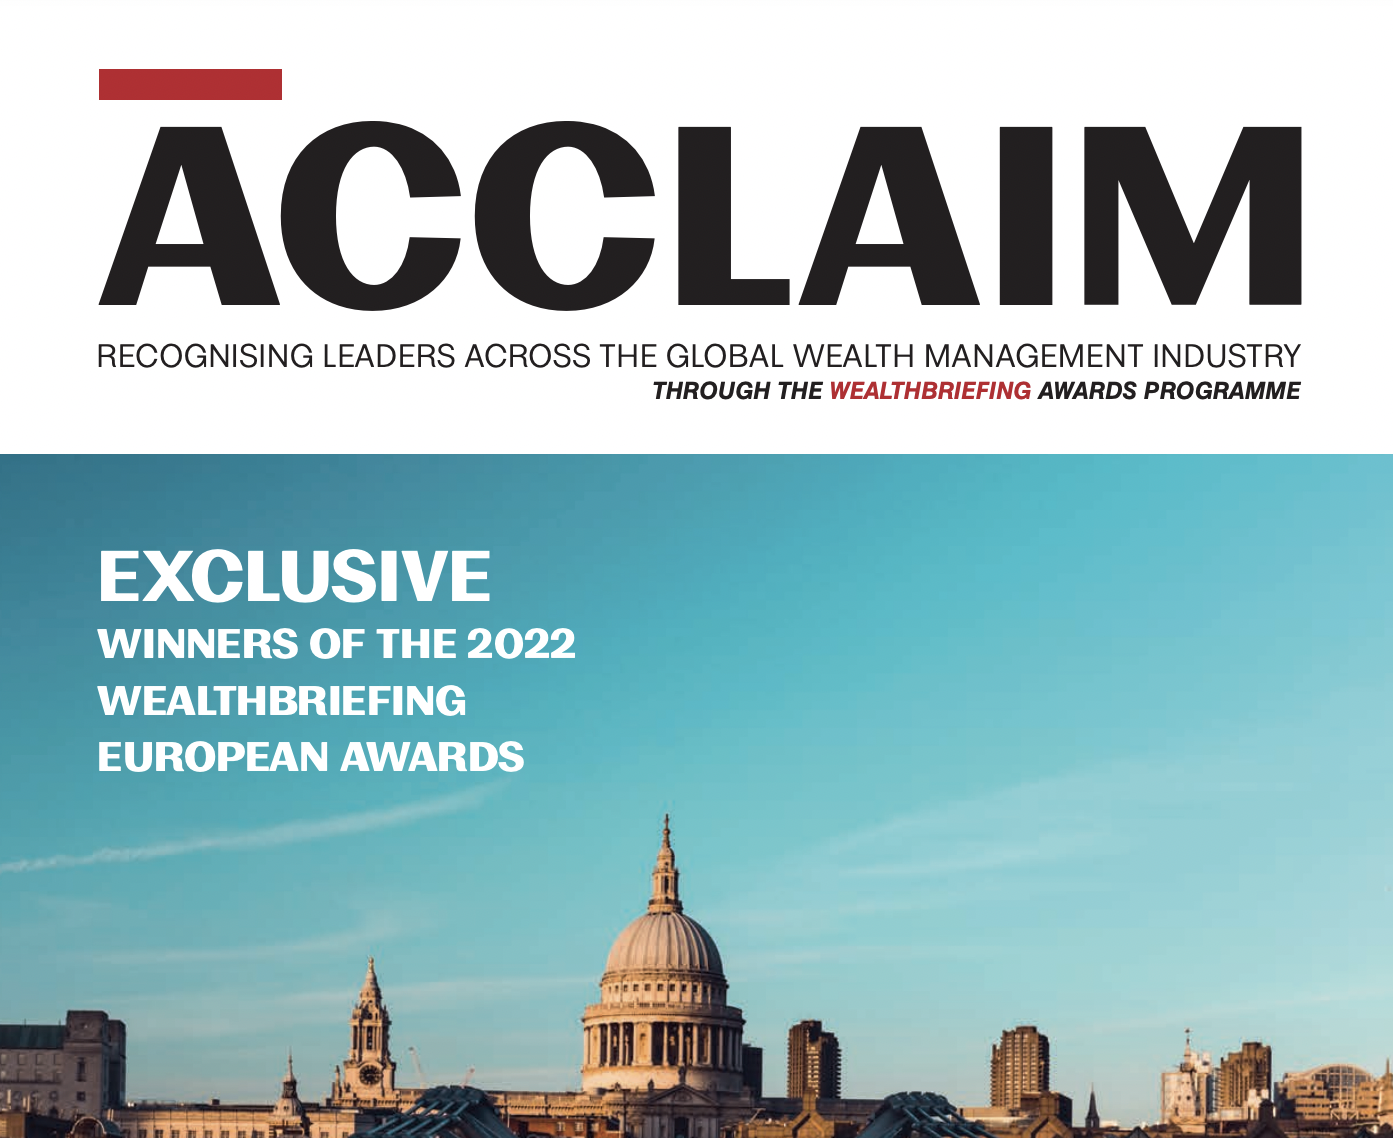 Acclaim recognising leaders across the global wealth management cycle